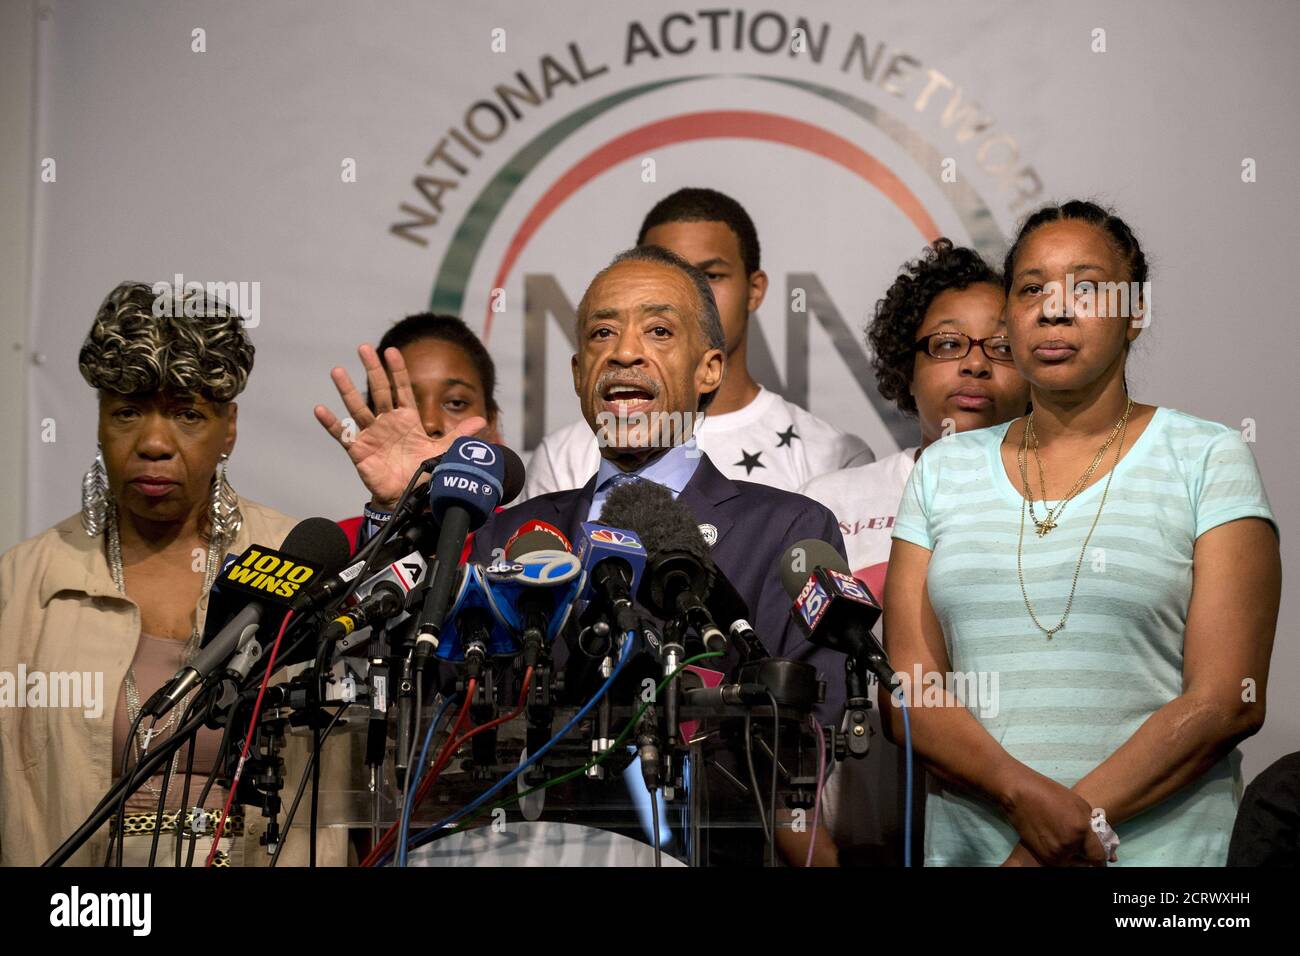 Rev. Al Sharpton (C) speaks with the family of Eric Garner during a news conference at the National Action Network in New York July 14, 2015. One day after settling a $5.9 million wrongful death case with New York City, the family of Eric Garner renewed calls to criminally charge the police officer who put him in a fatal chokehold last July. REUTERS/Brendan McDermid Stock Photo